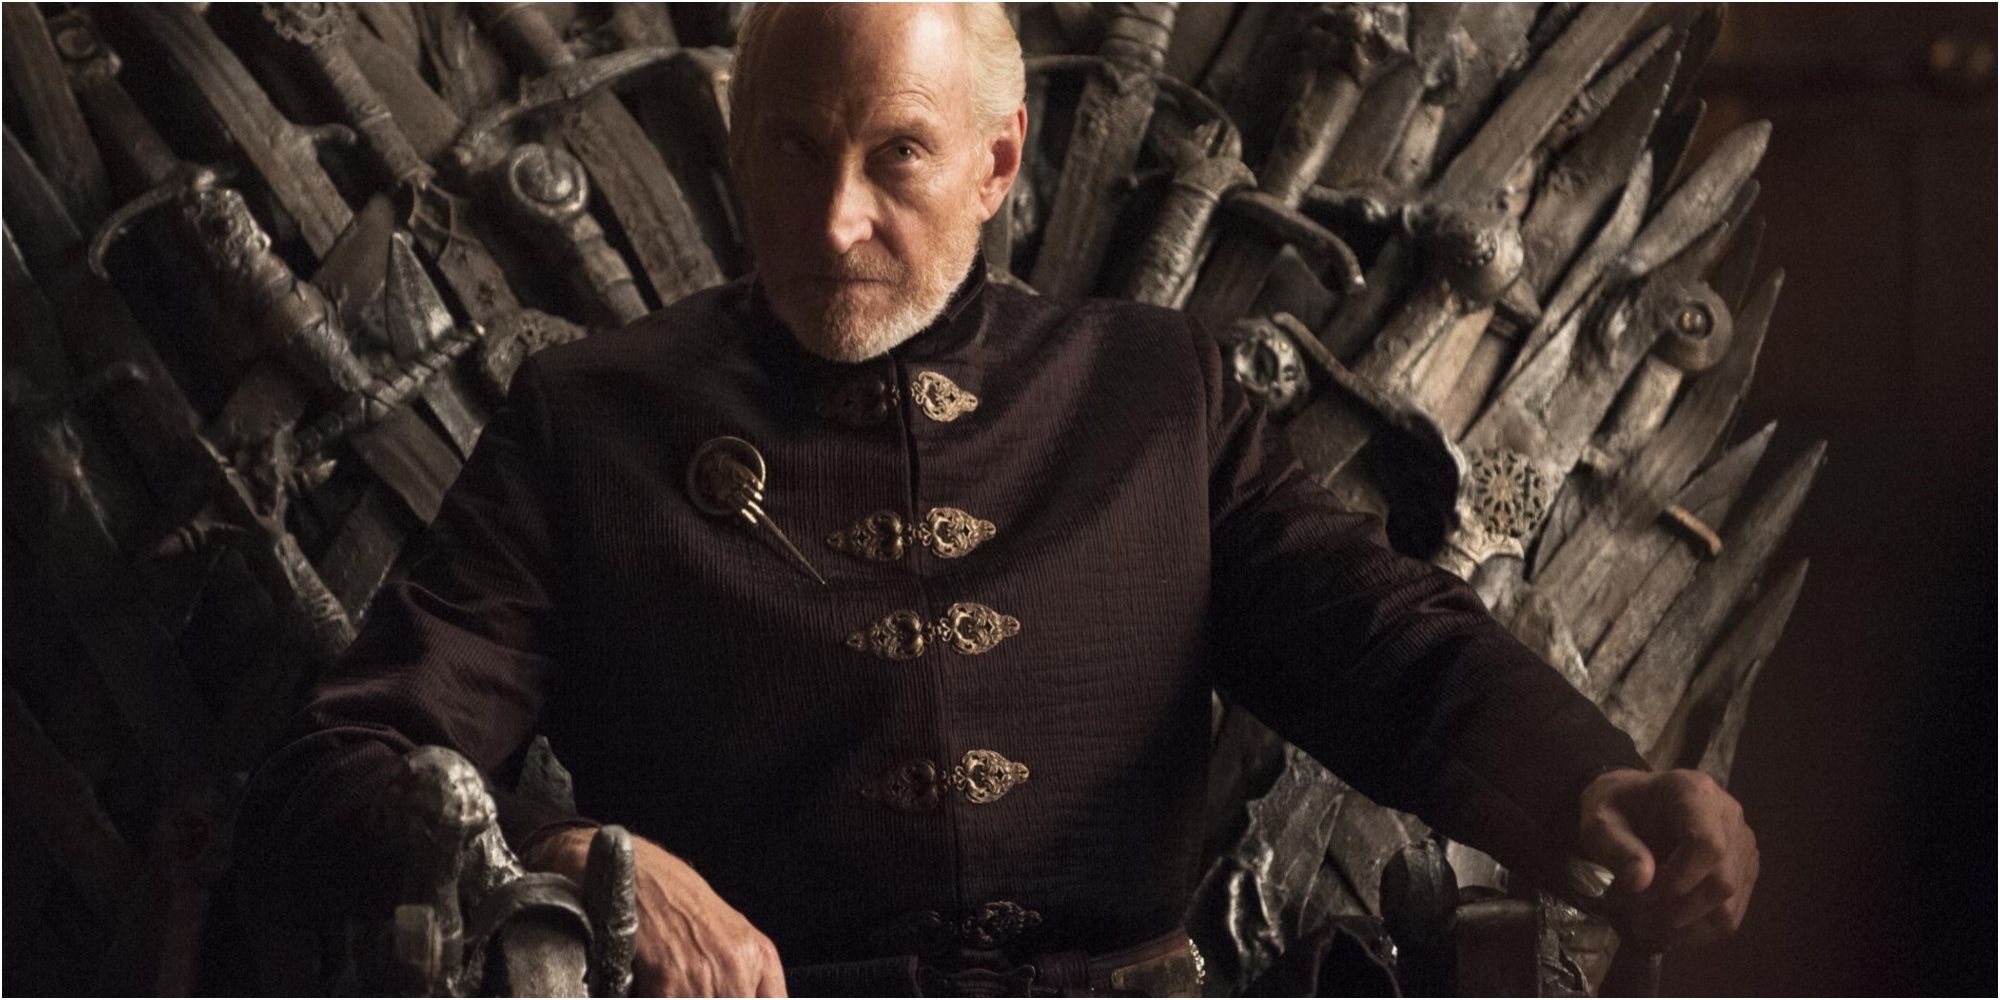 Tywin Lannister in Game of Thrones.